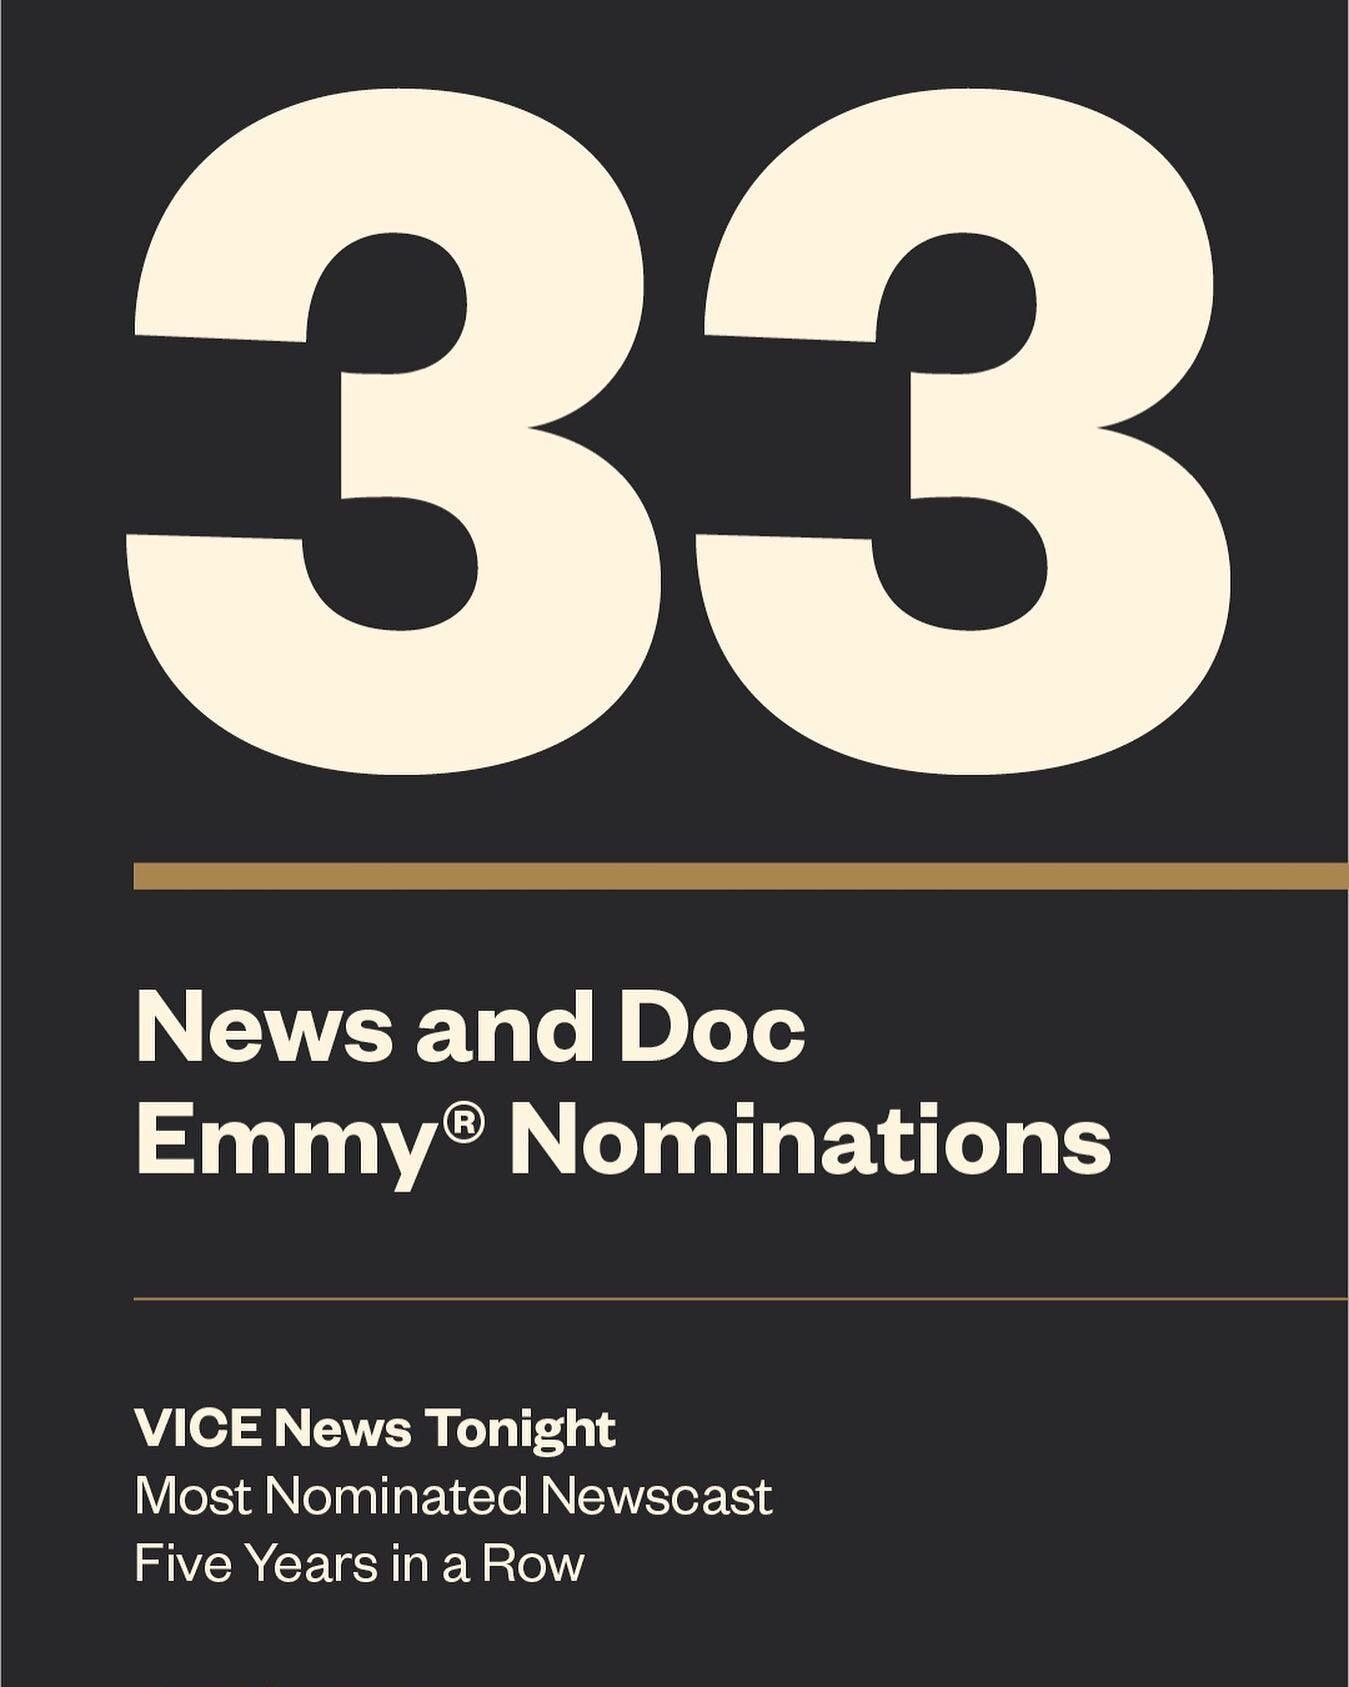 That high five emoji thing to all the talented people that pour their hearts into giving the world around them a home to tell their stories. @vicenews @vice #emmys #vice #news #story #yay